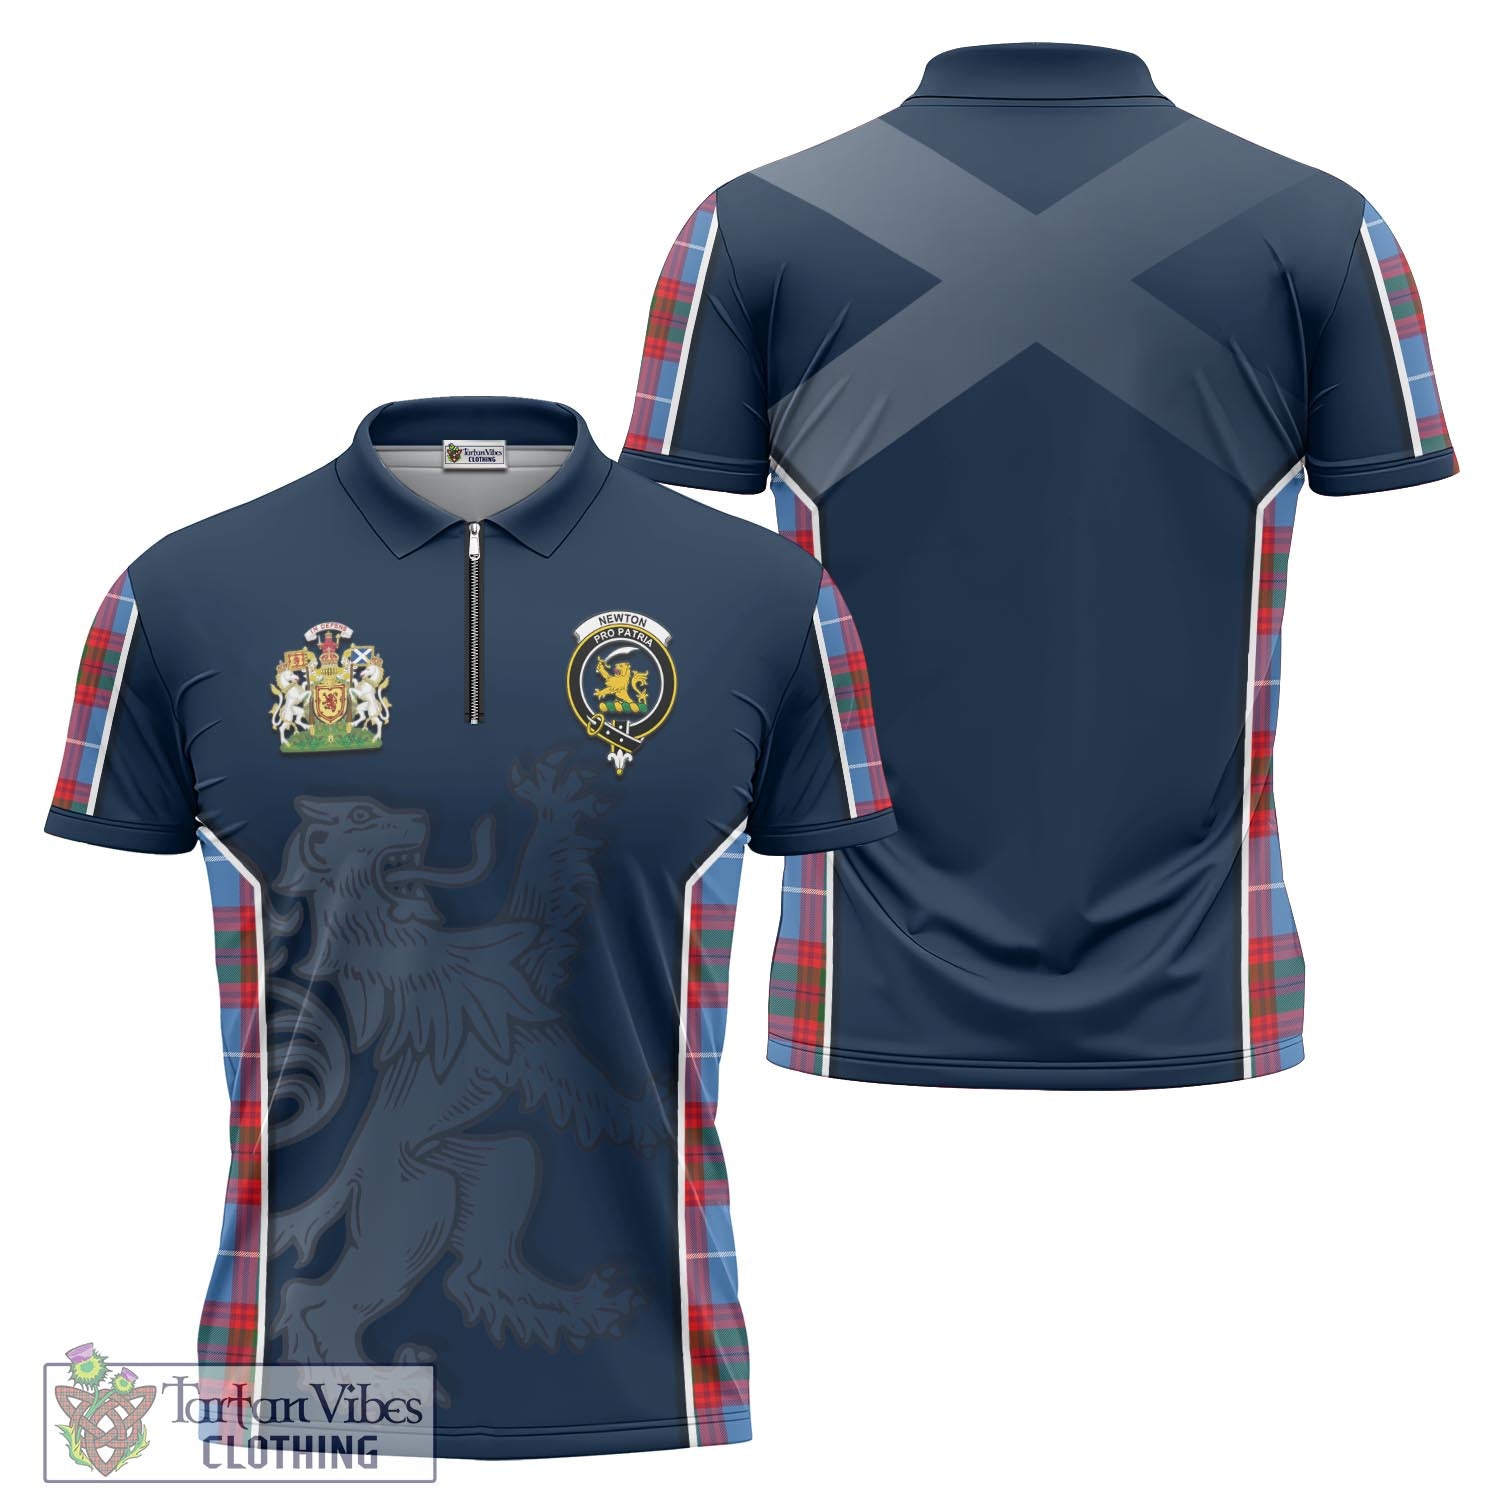 Tartan Vibes Clothing Newton Tartan Zipper Polo Shirt with Family Crest and Lion Rampant Vibes Sport Style